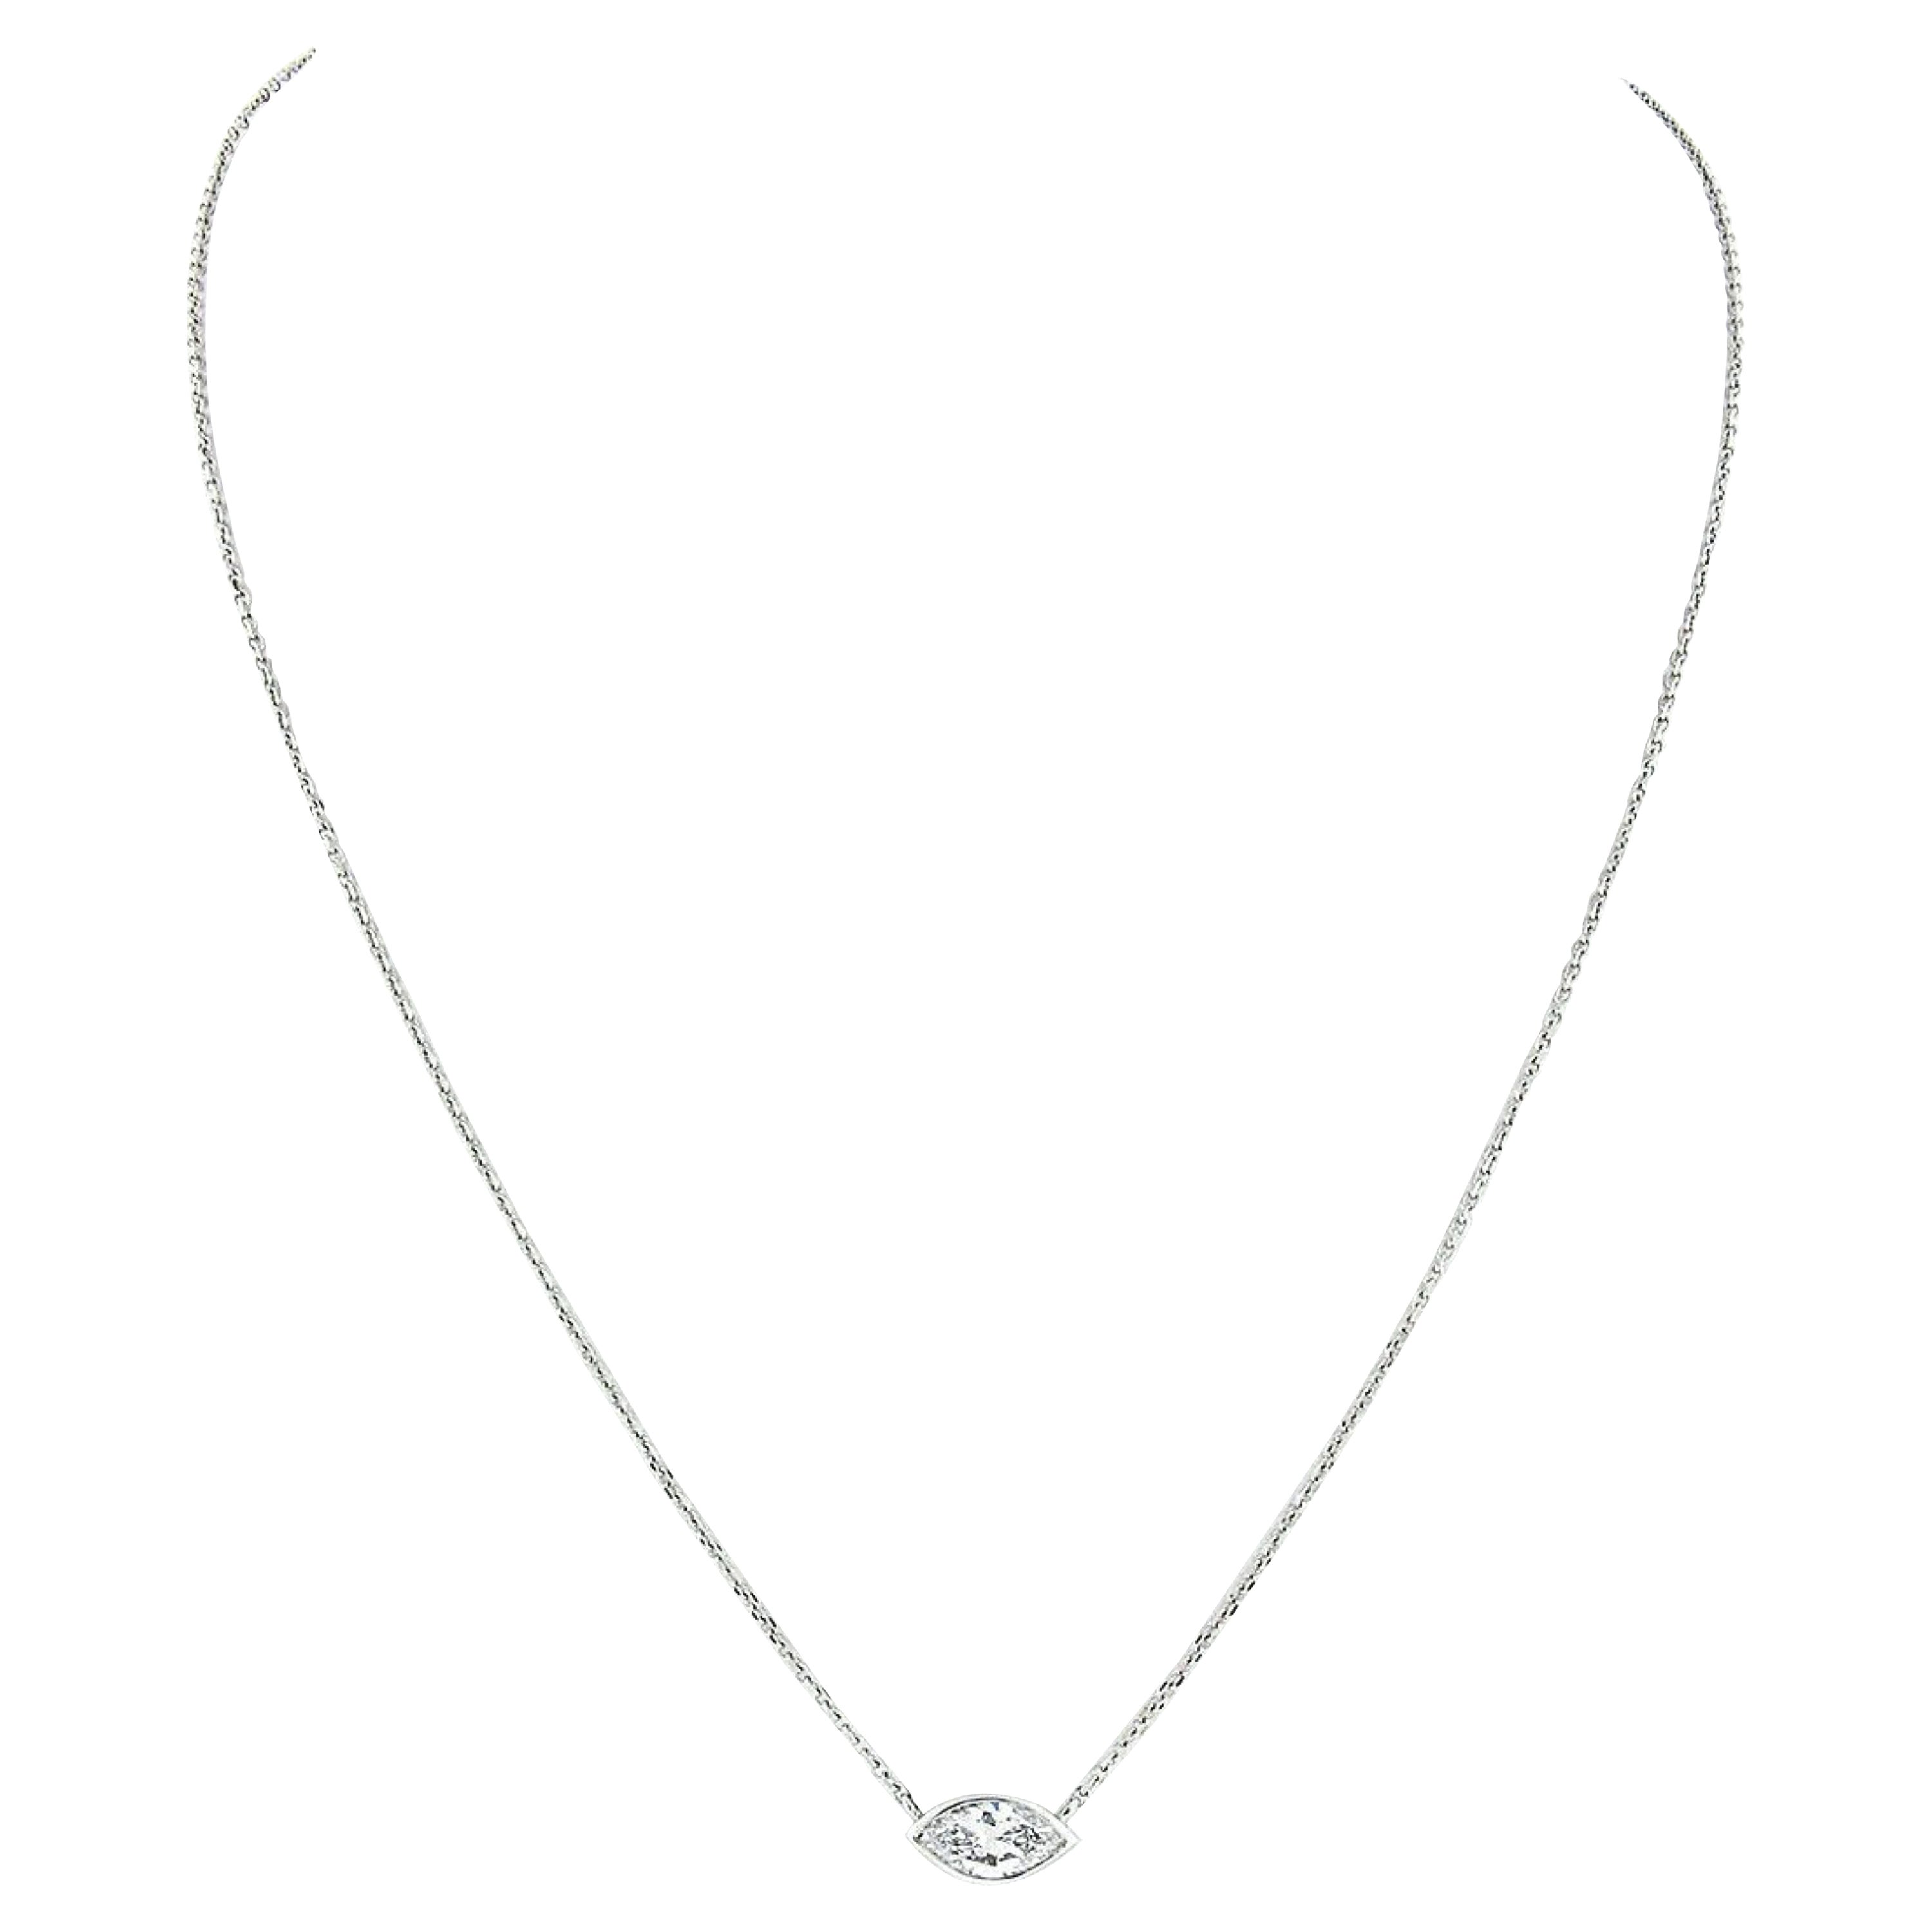 New 14K Gold .66ct GIA Marquise Bezel Diamond Solitaire Pendant Adjustable Chain For Sale